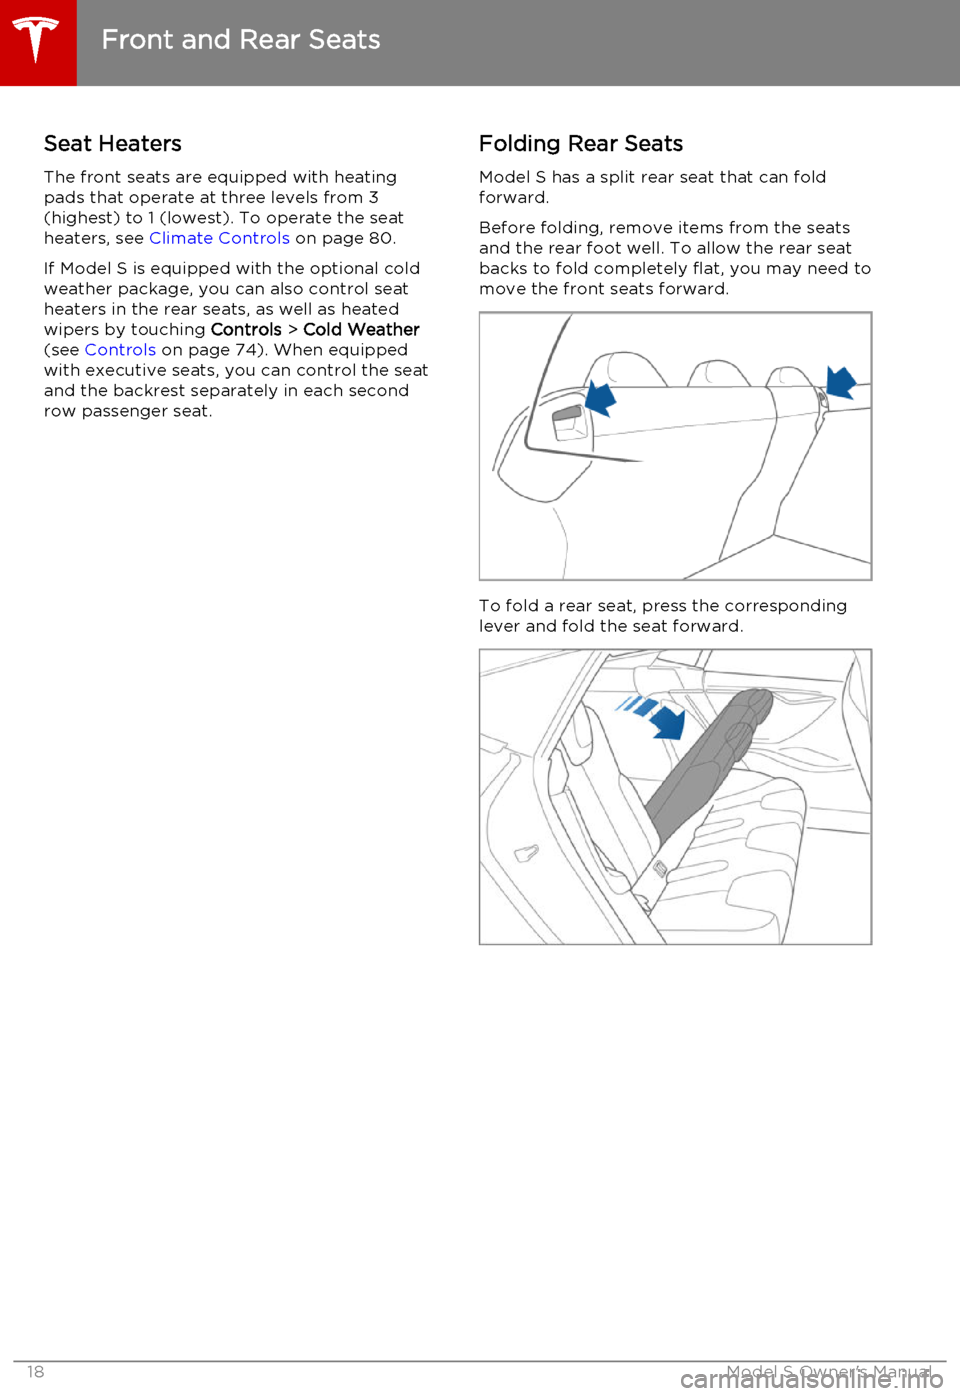 TESLA MODEL S 2015  Owners Manual Seat Heaters
The front seats are equipped with heating pads that operate at three levels from 3
(highest) to 1 (lowest). To operate the seat
heaters, see  Climate Controls  on page 80.
If Model S is e